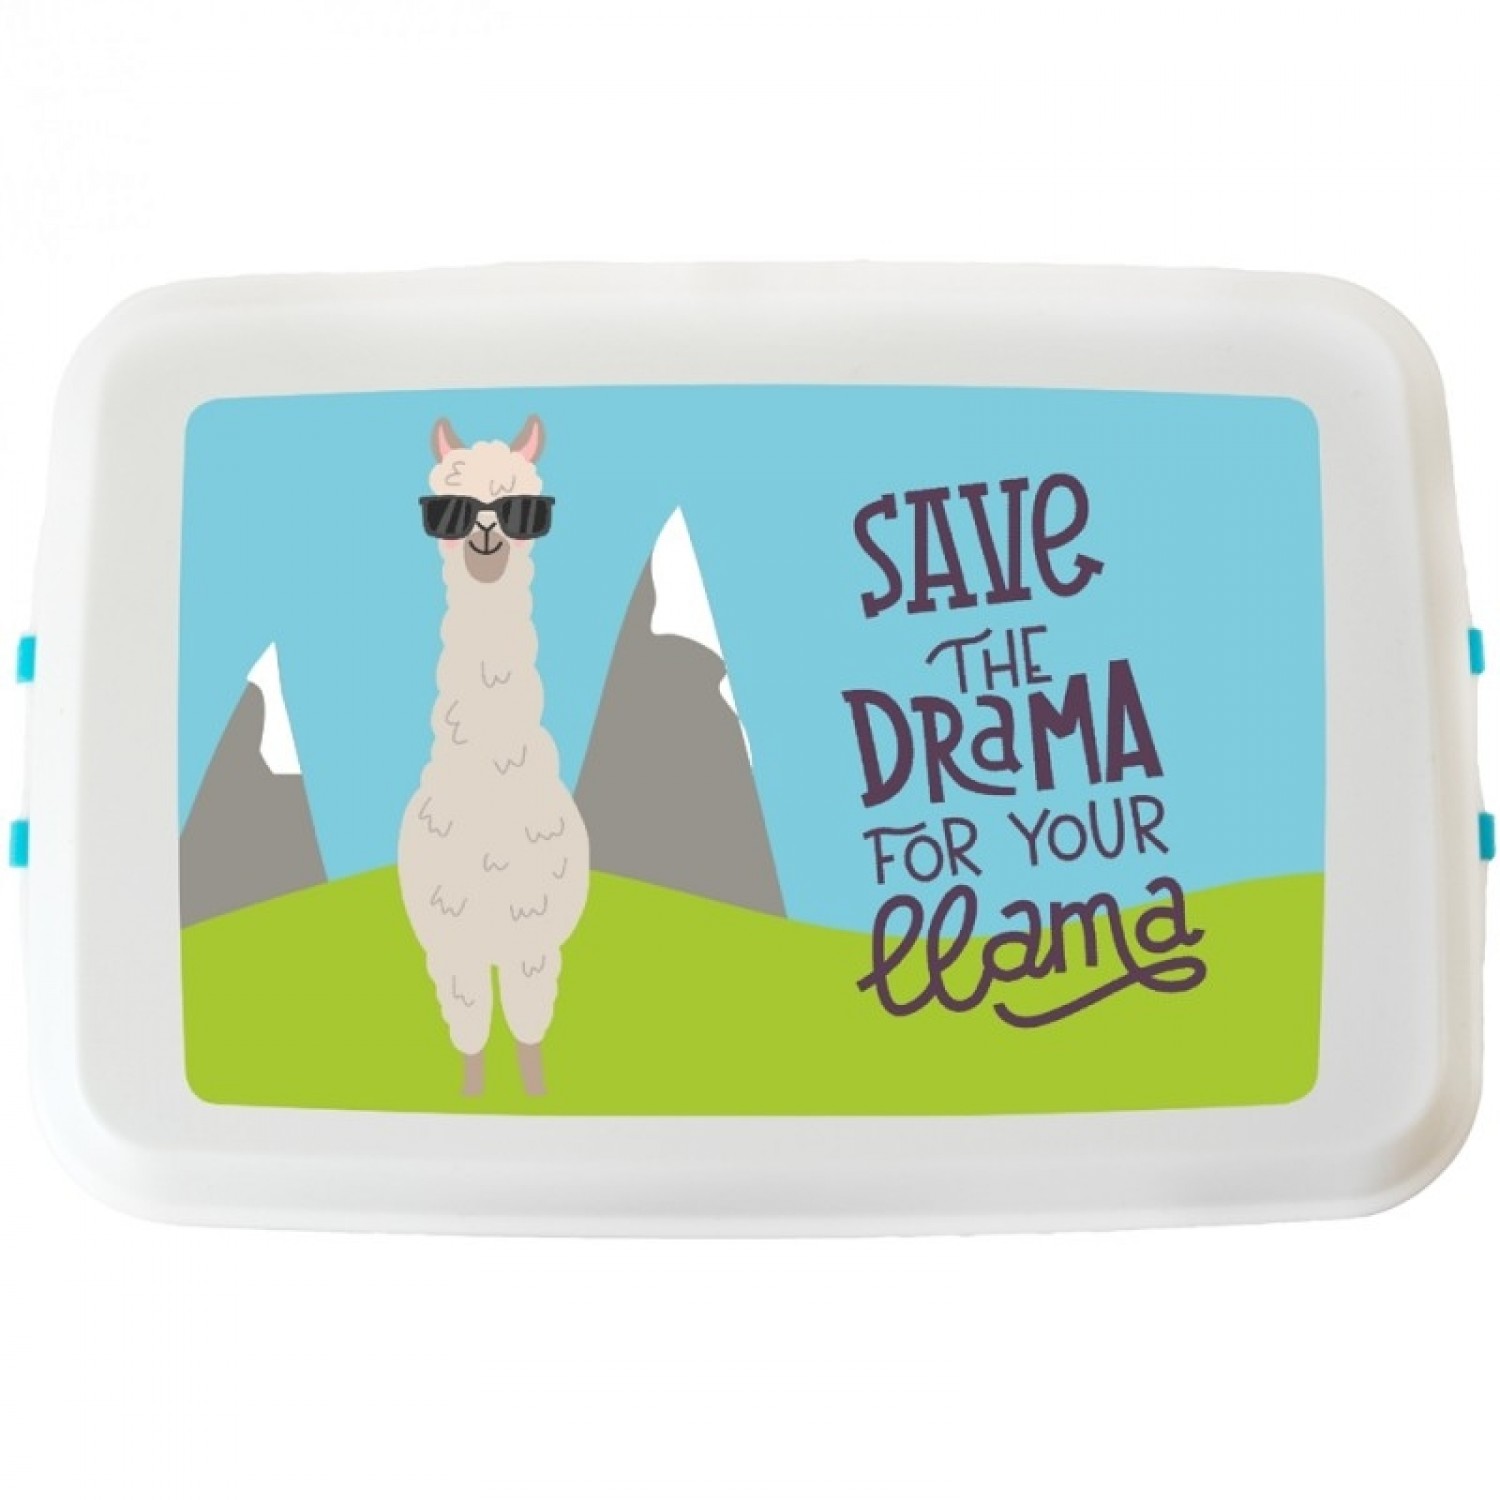 Biokunststoff Lunchbox - Save the Drama for your llama